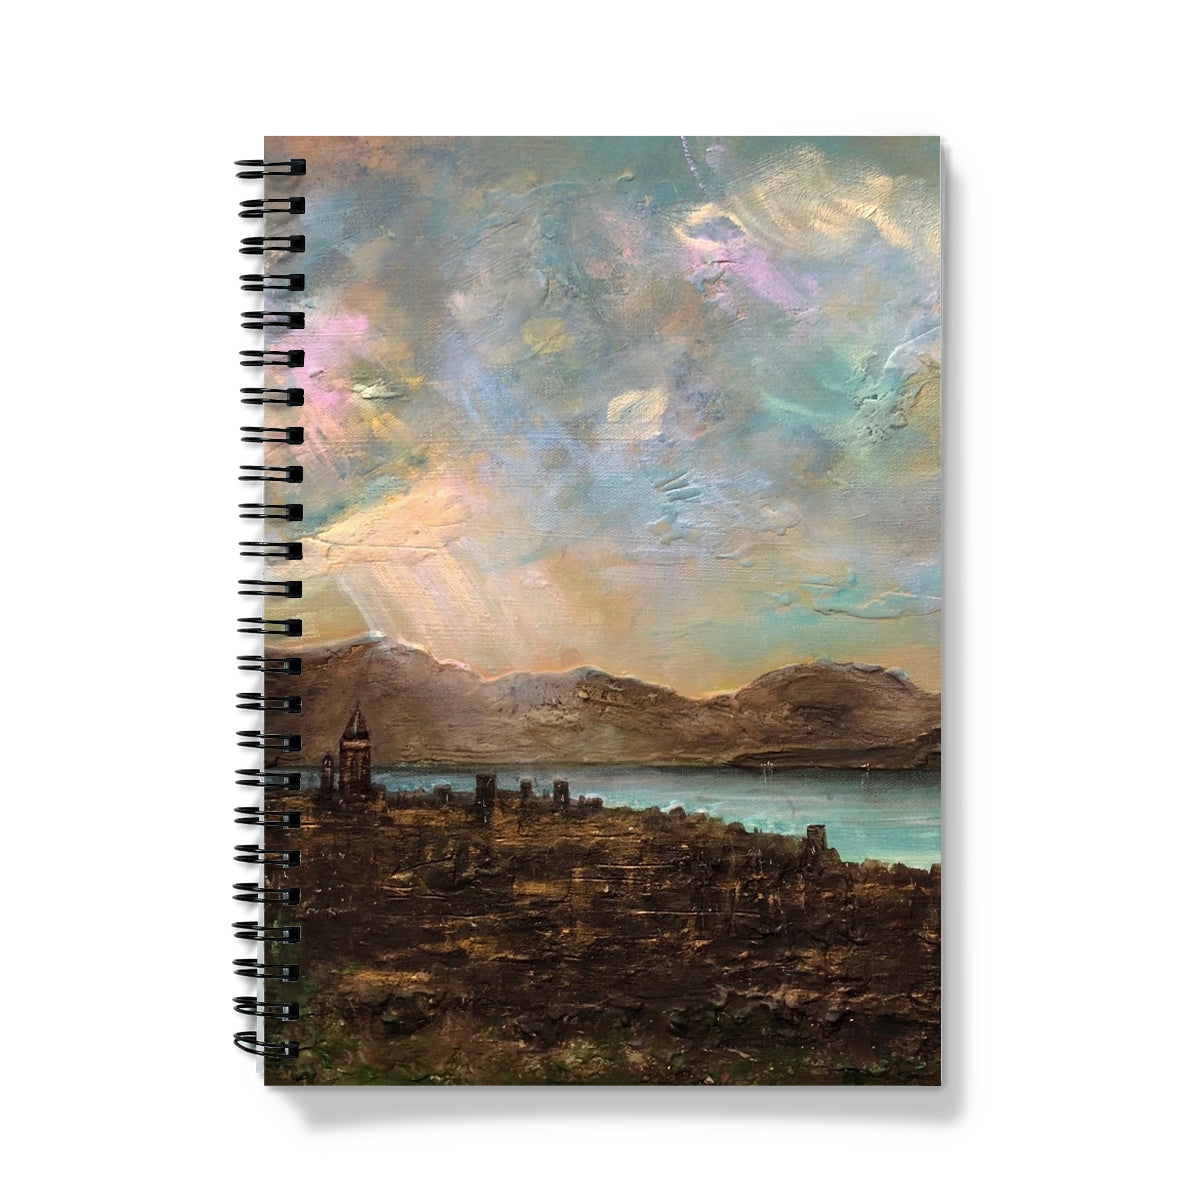 Angels Fingers Over Greenock Art Gifts Notebook-Journals & Notebooks-River Clyde Art Gallery-A4-Graph-Paintings, Prints, Homeware, Art Gifts From Scotland By Scottish Artist Kevin Hunter